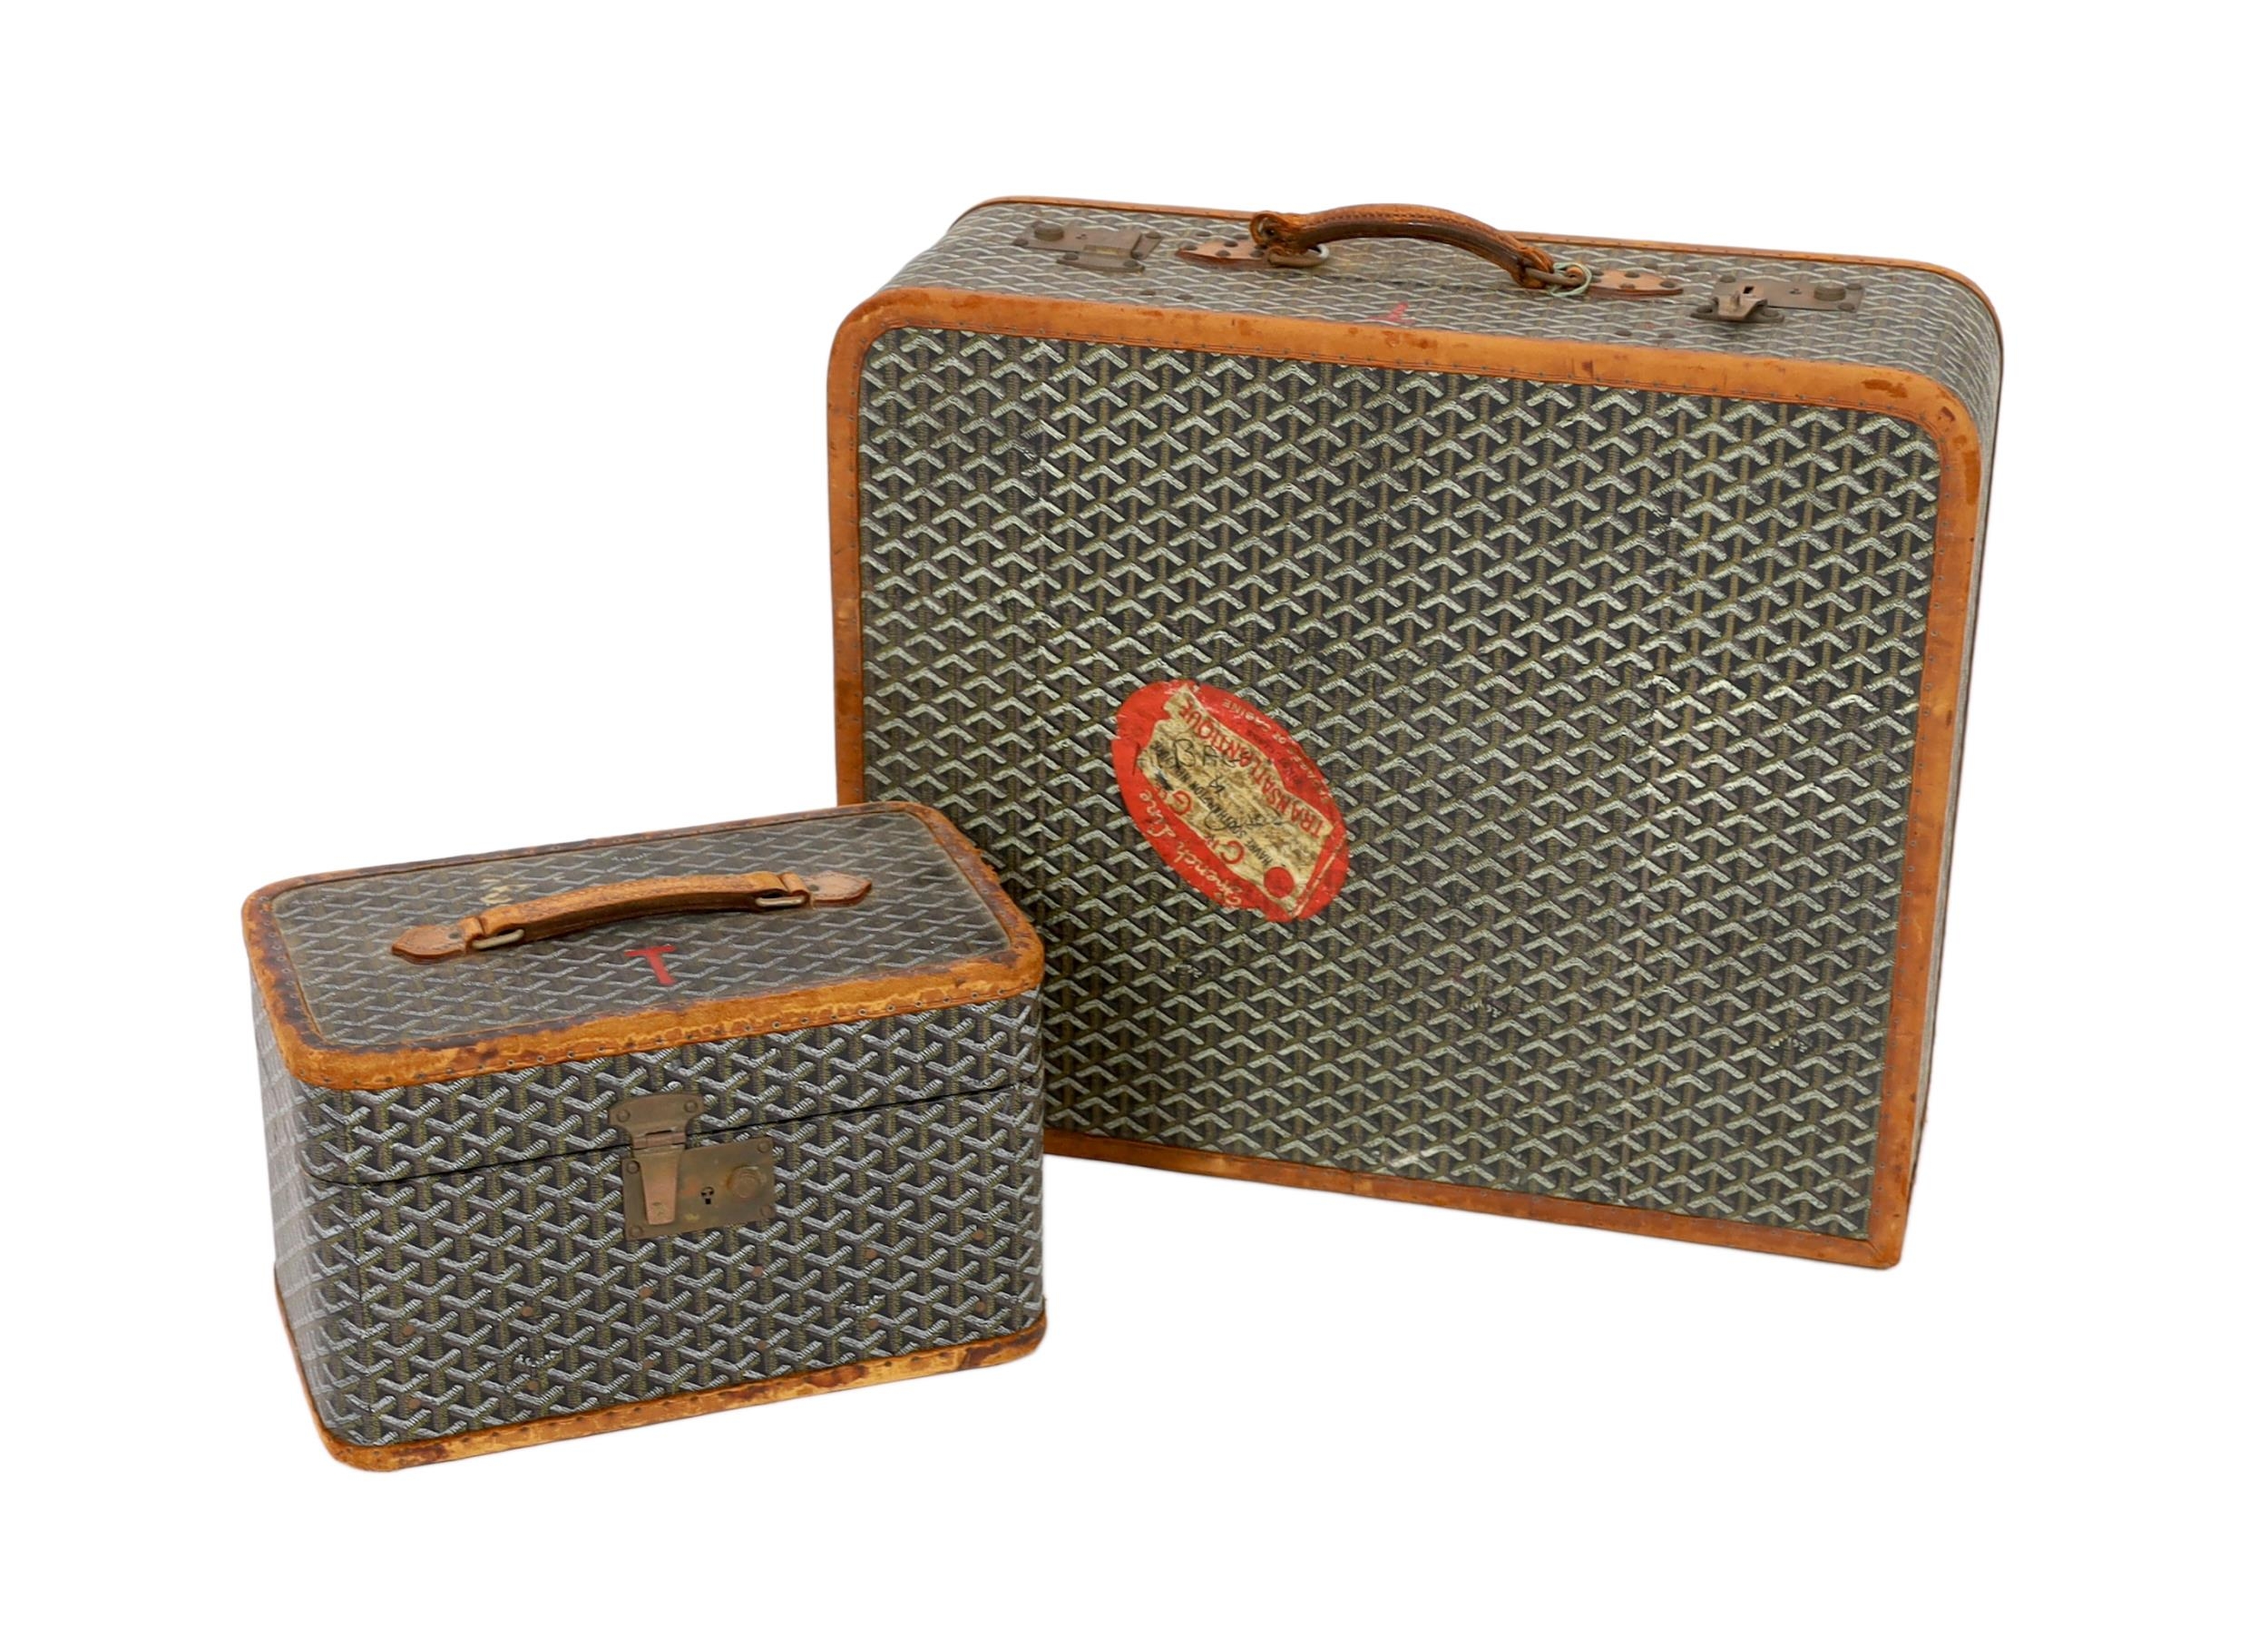 A 1940's Goyard vanity case with matching suitcase, each with tan